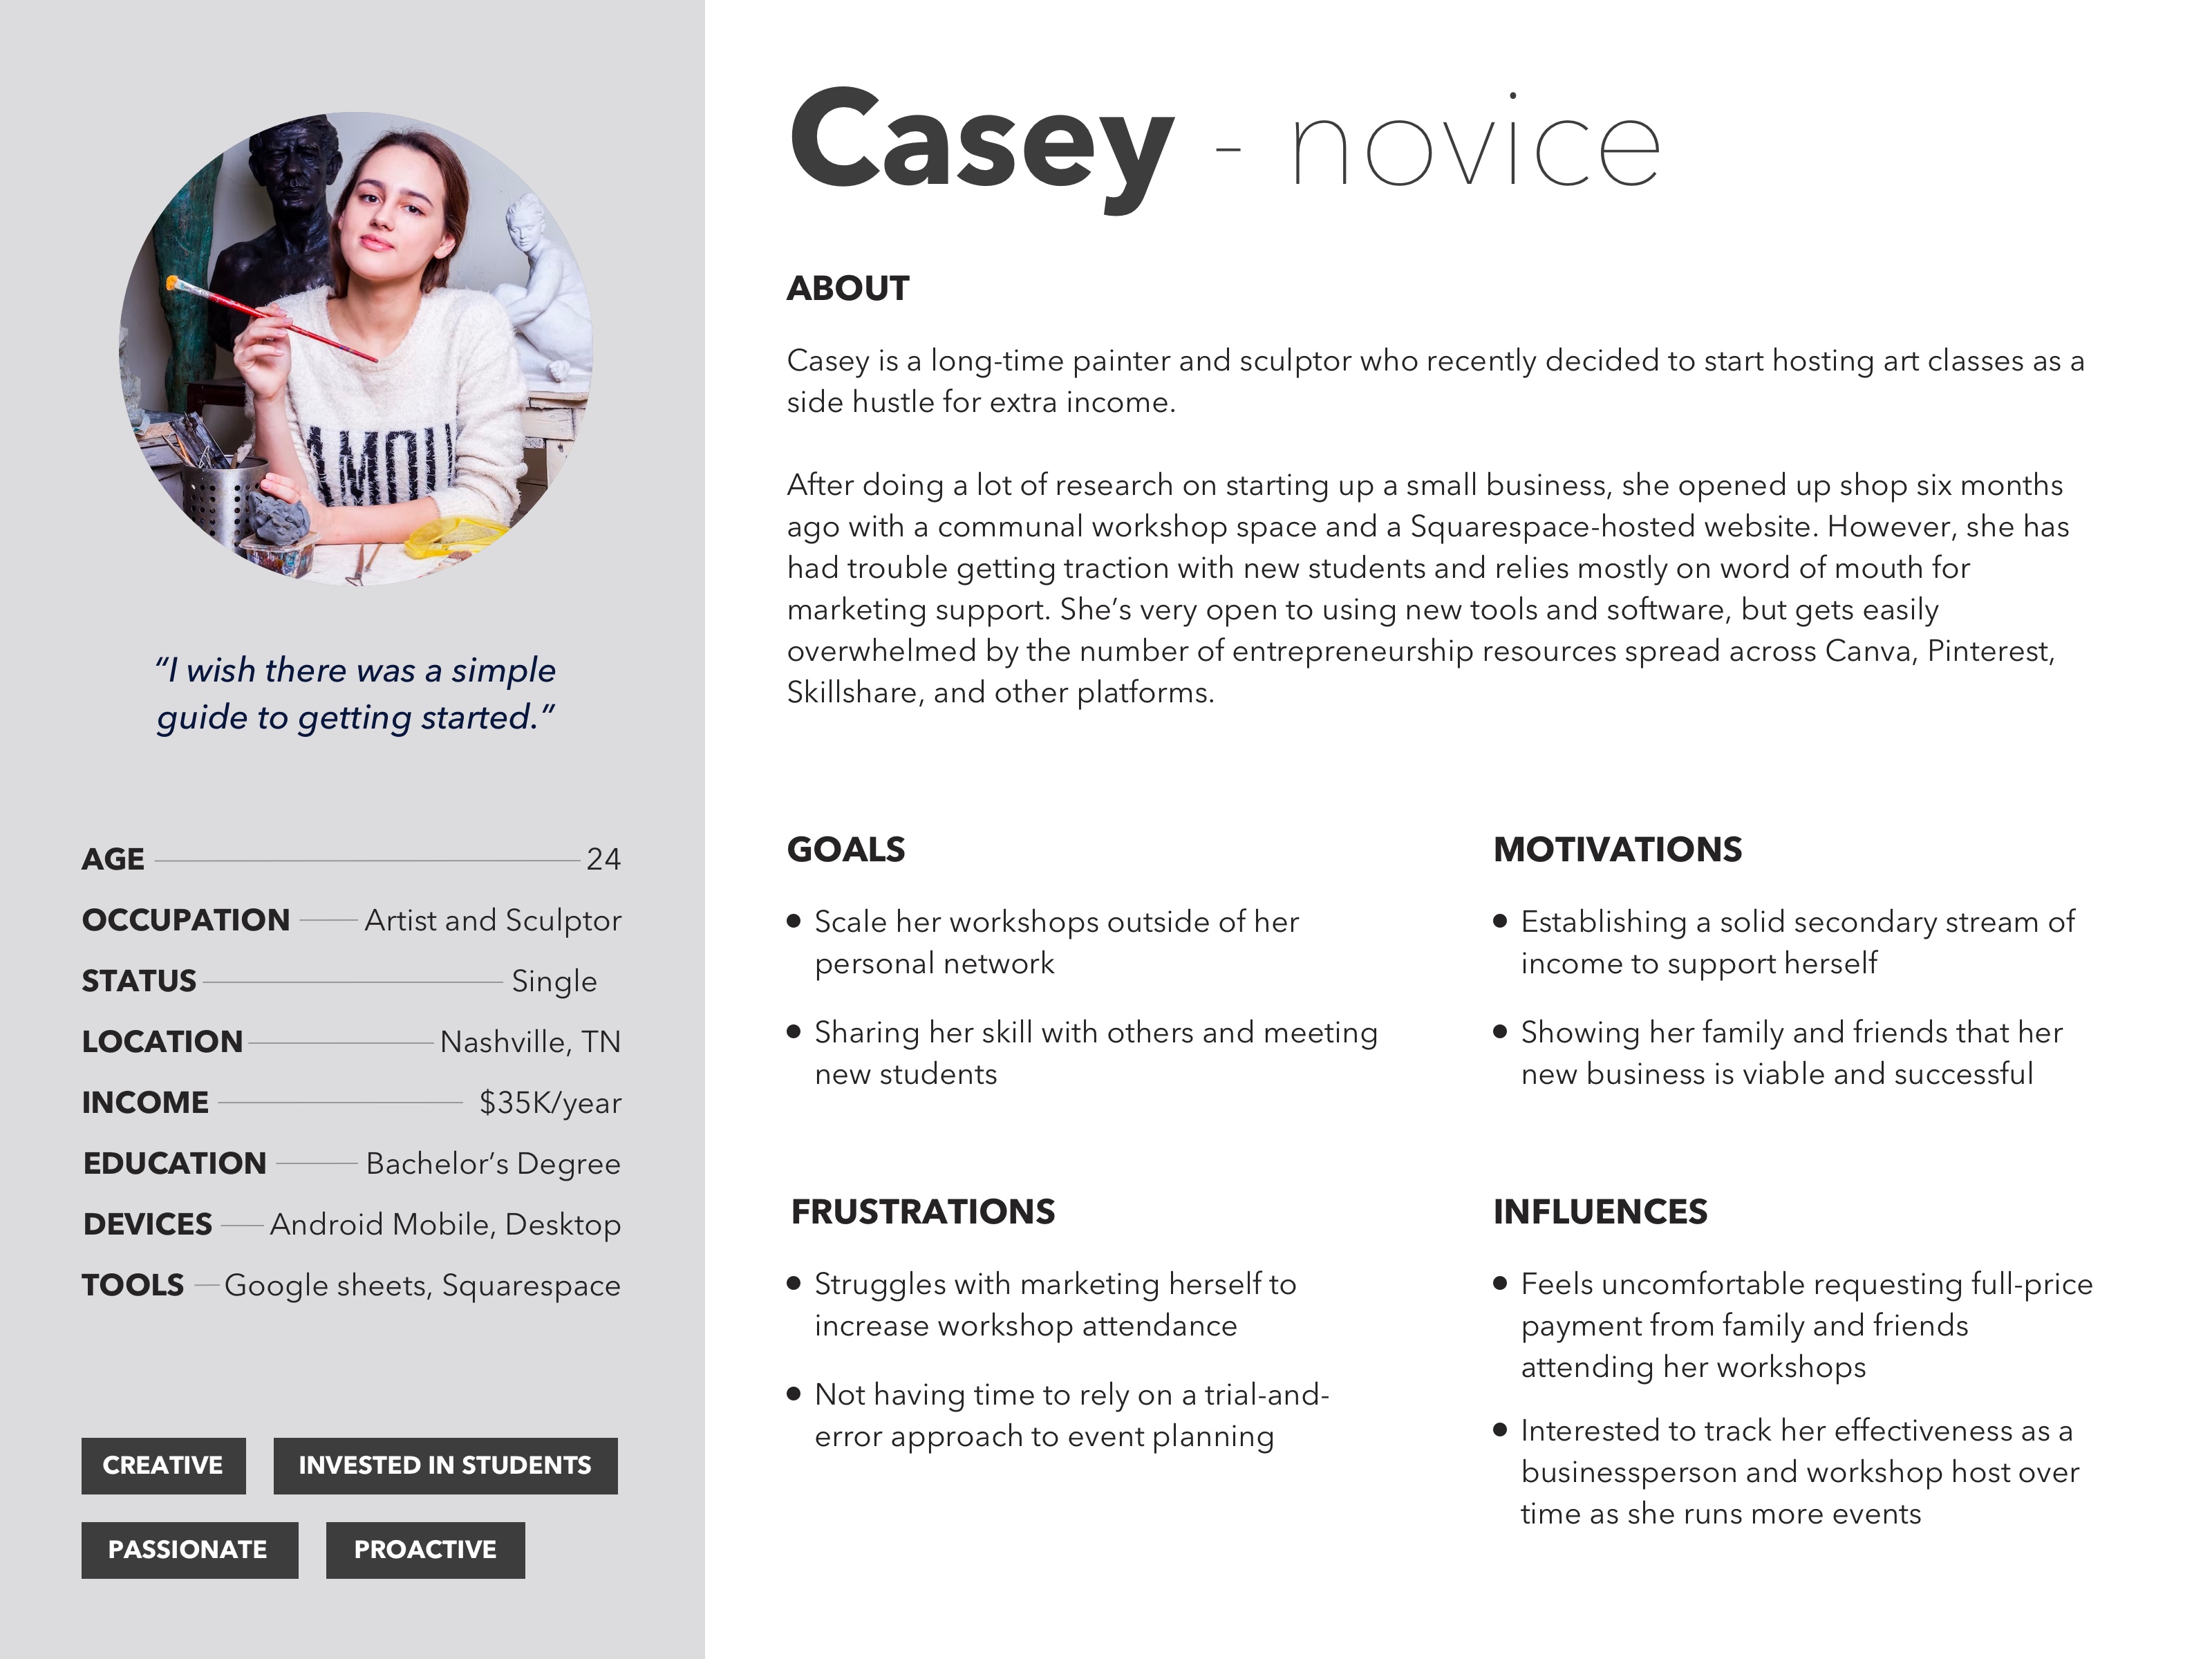 image of a persona of Casey, the novice host. The persona includes a summary, goals, motivations, frustrations, influences, and demographic information, as well as a headshot.